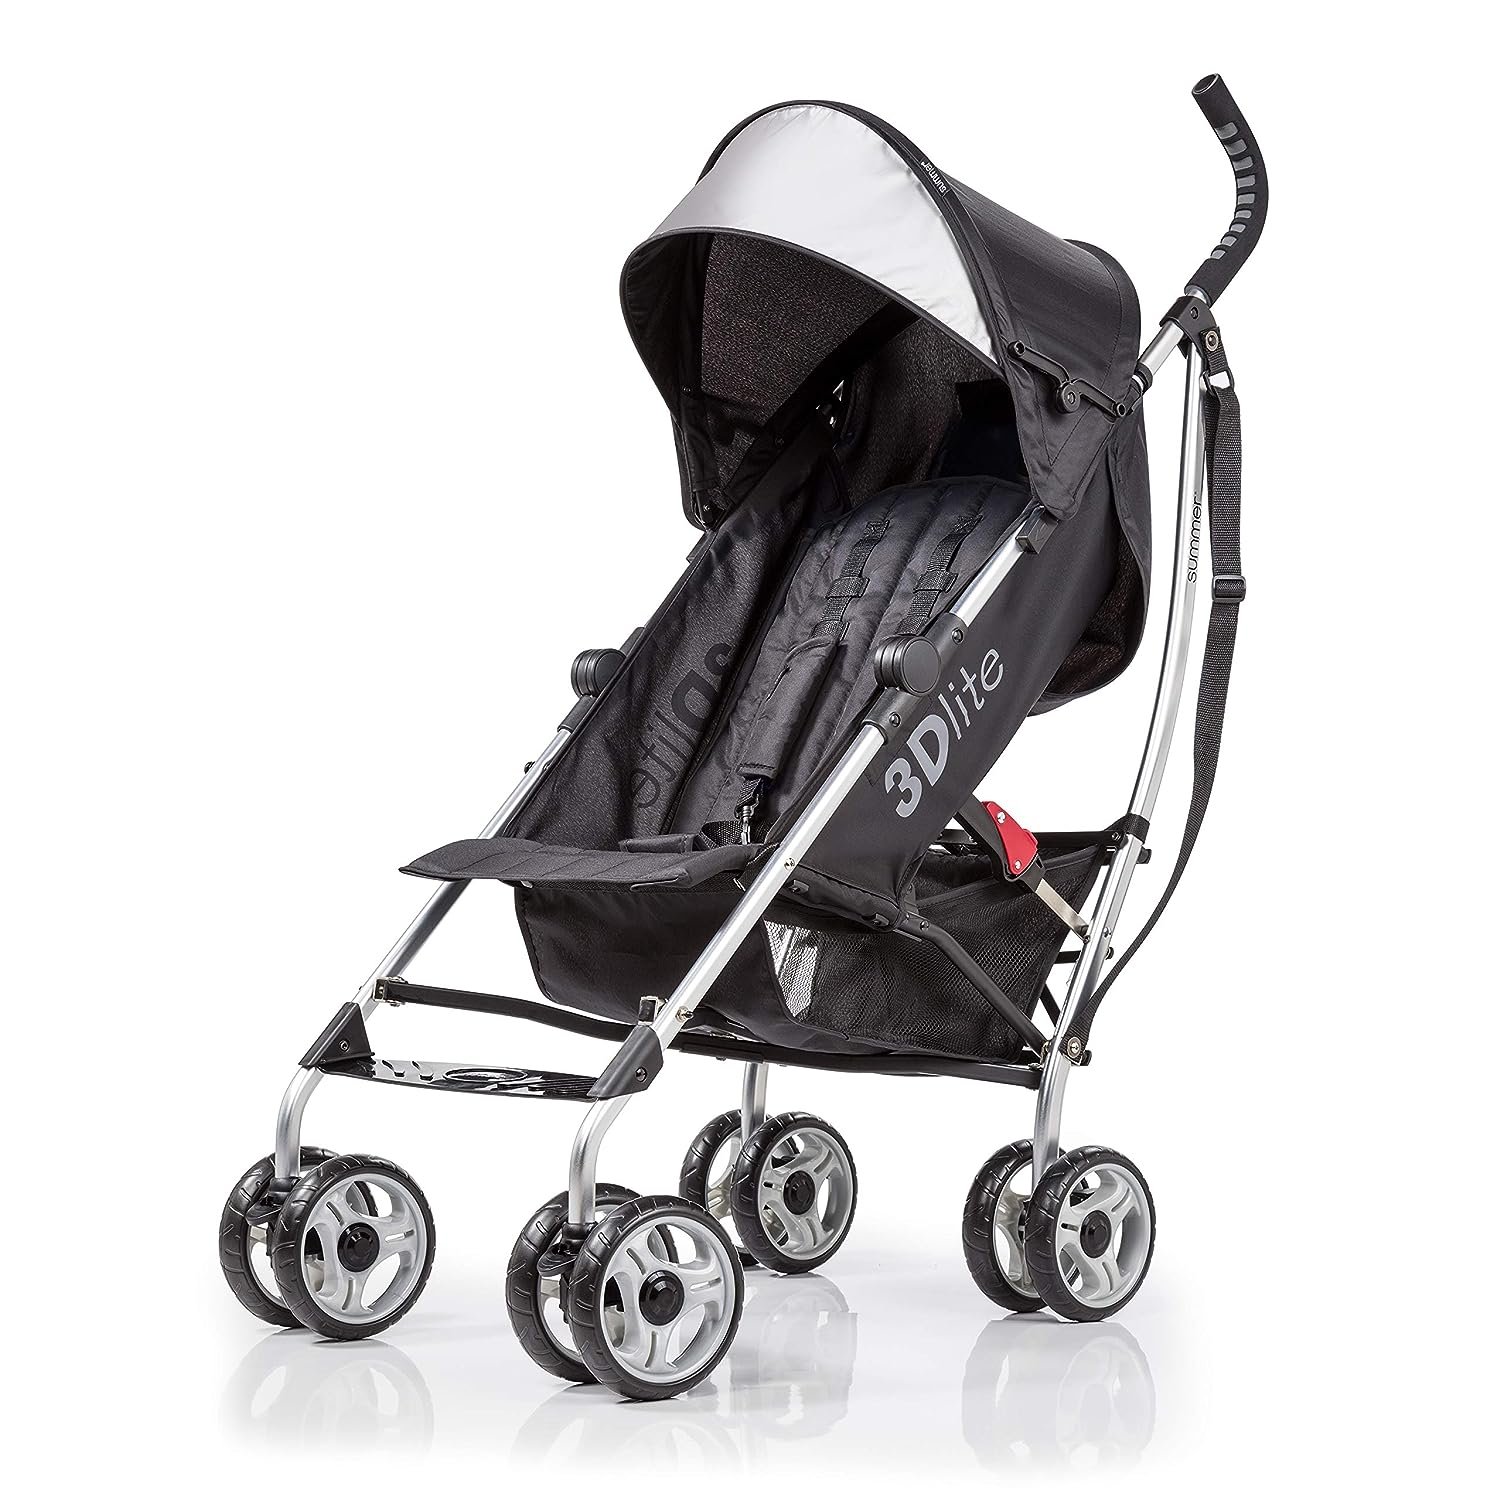 Best Stroller for a Cruise (Polling Data)